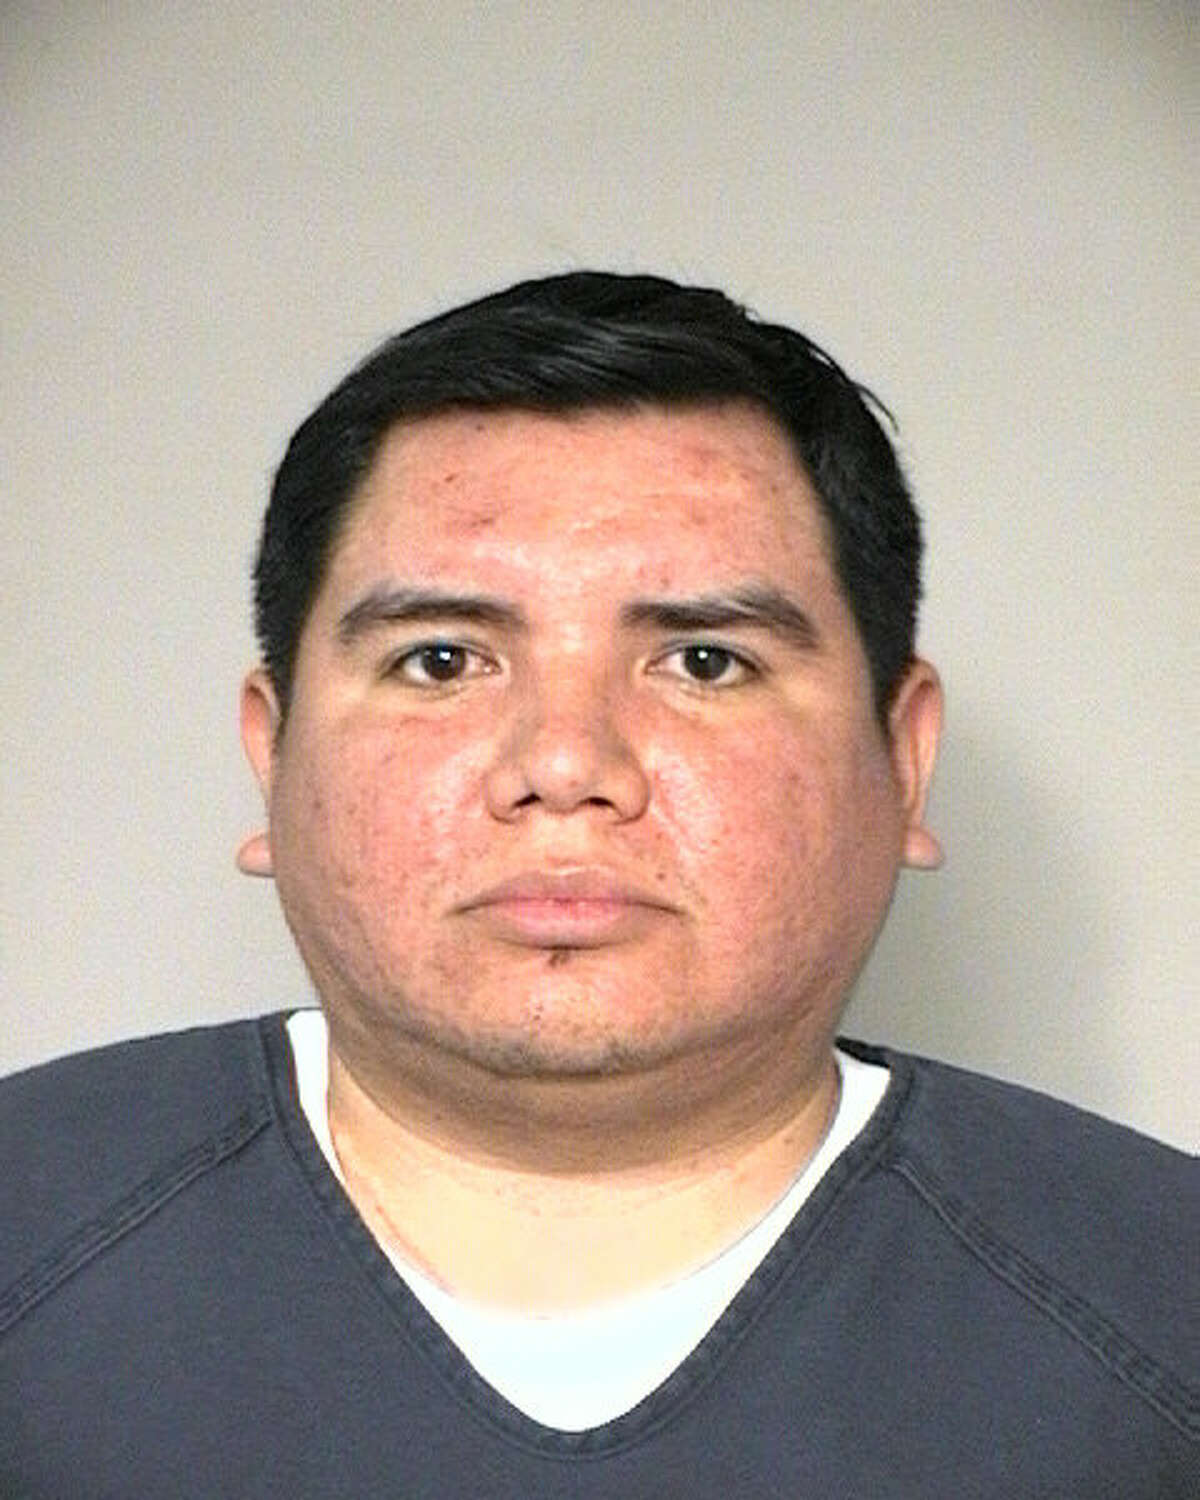 Richard Mendoza, Jr. was sentenced to 50 years in prison and a $10,000 fine on February 11, 2013 after a jury convicted him of a murder he committed over 10 years ago. The 28-year-old Fresno man was charged with shooting Christopher Daigle to death in 2002 when both men were only 17.